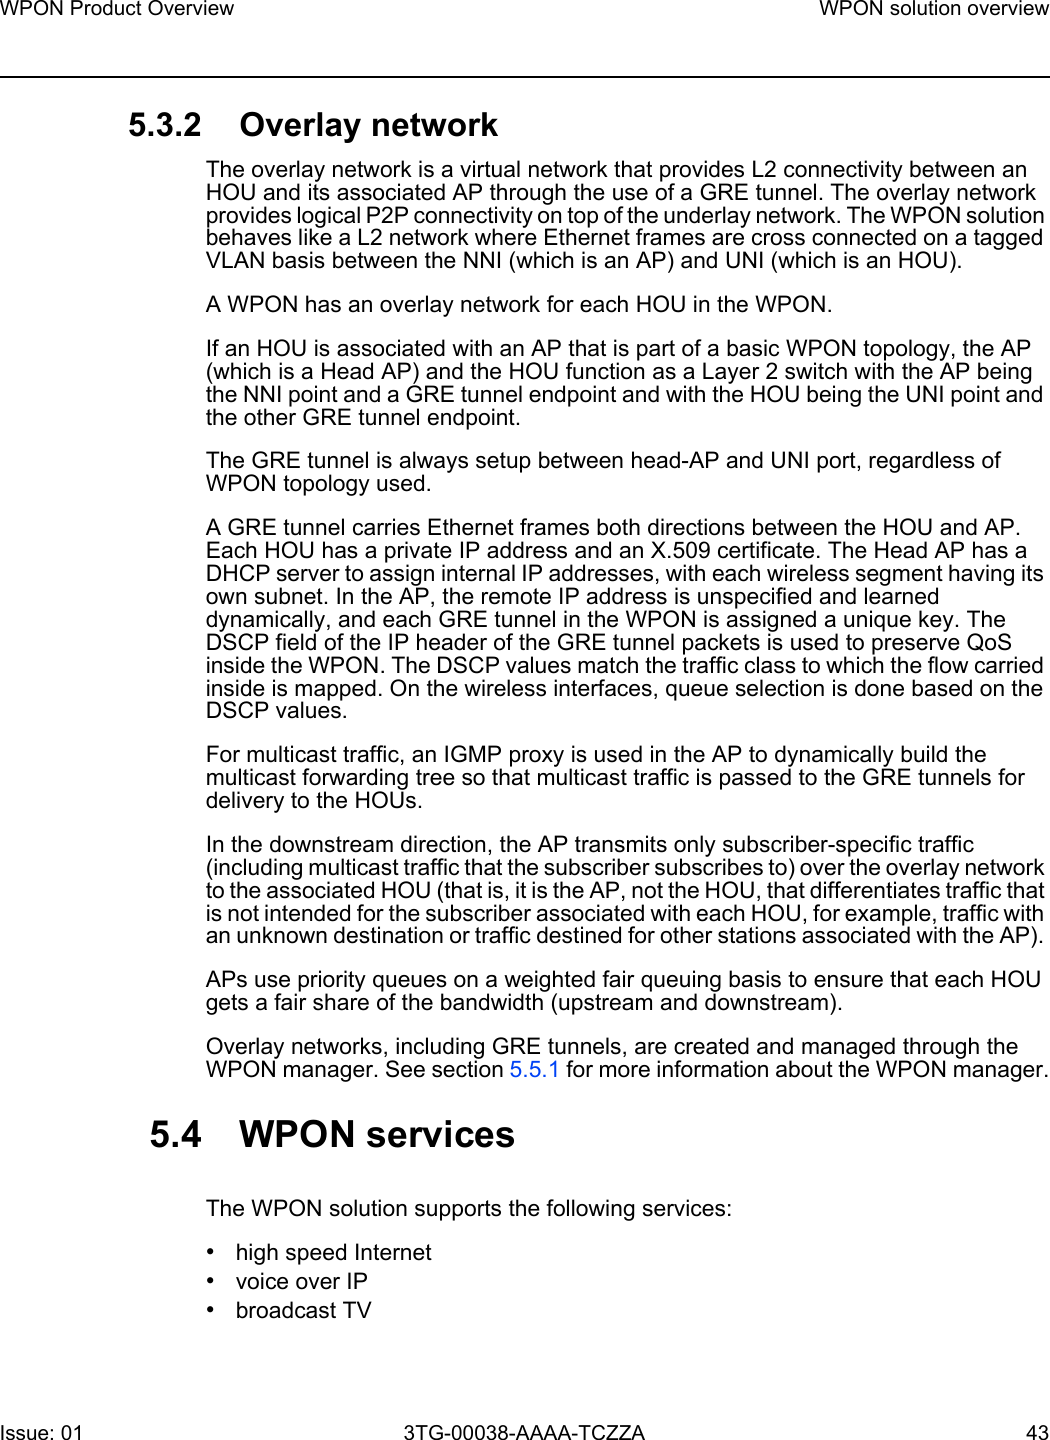 WPON Product Overview WPON solution overviewIssue: 01 3TG-00038-AAAA-TCZZA 43 5.3.2 Overlay networkThe overlay network is a virtual network that provides L2 connectivity between an HOU and its associated AP through the use of a GRE tunnel. The overlay network provides logical P2P connectivity on top of the underlay network. The WPON solution behaves like a L2 network where Ethernet frames are cross connected on a tagged VLAN basis between the NNI (which is an AP) and UNI (which is an HOU).A WPON has an overlay network for each HOU in the WPON.If an HOU is associated with an AP that is part of a basic WPON topology, the AP (which is a Head AP) and the HOU function as a Layer 2 switch with the AP being the NNI point and a GRE tunnel endpoint and with the HOU being the UNI point and the other GRE tunnel endpoint.The GRE tunnel is always setup between head-AP and UNI port, regardless of WPON topology used. A GRE tunnel carries Ethernet frames both directions between the HOU and AP. Each HOU has a private IP address and an X.509 certificate. The Head AP has a DHCP server to assign internal IP addresses, with each wireless segment having its own subnet. In the AP, the remote IP address is unspecified and learned dynamically, and each GRE tunnel in the WPON is assigned a unique key. The DSCP field of the IP header of the GRE tunnel packets is used to preserve QoS inside the WPON. The DSCP values match the traffic class to which the flow carried inside is mapped. On the wireless interfaces, queue selection is done based on the DSCP values.For multicast traffic, an IGMP proxy is used in the AP to dynamically build the multicast forwarding tree so that multicast traffic is passed to the GRE tunnels for delivery to the HOUs.In the downstream direction, the AP transmits only subscriber-specific traffic (including multicast traffic that the subscriber subscribes to) over the overlay network to the associated HOU (that is, it is the AP, not the HOU, that differentiates traffic that is not intended for the subscriber associated with each HOU, for example, traffic with an unknown destination or traffic destined for other stations associated with the AP). APs use priority queues on a weighted fair queuing basis to ensure that each HOU gets a fair share of the bandwidth (upstream and downstream).Overlay networks, including GRE tunnels, are created and managed through the WPON manager. See section 5.5.1 for more information about the WPON manager.5.4 WPON servicesThe WPON solution supports the following services:•high speed Internet•voice over IP•broadcast TV